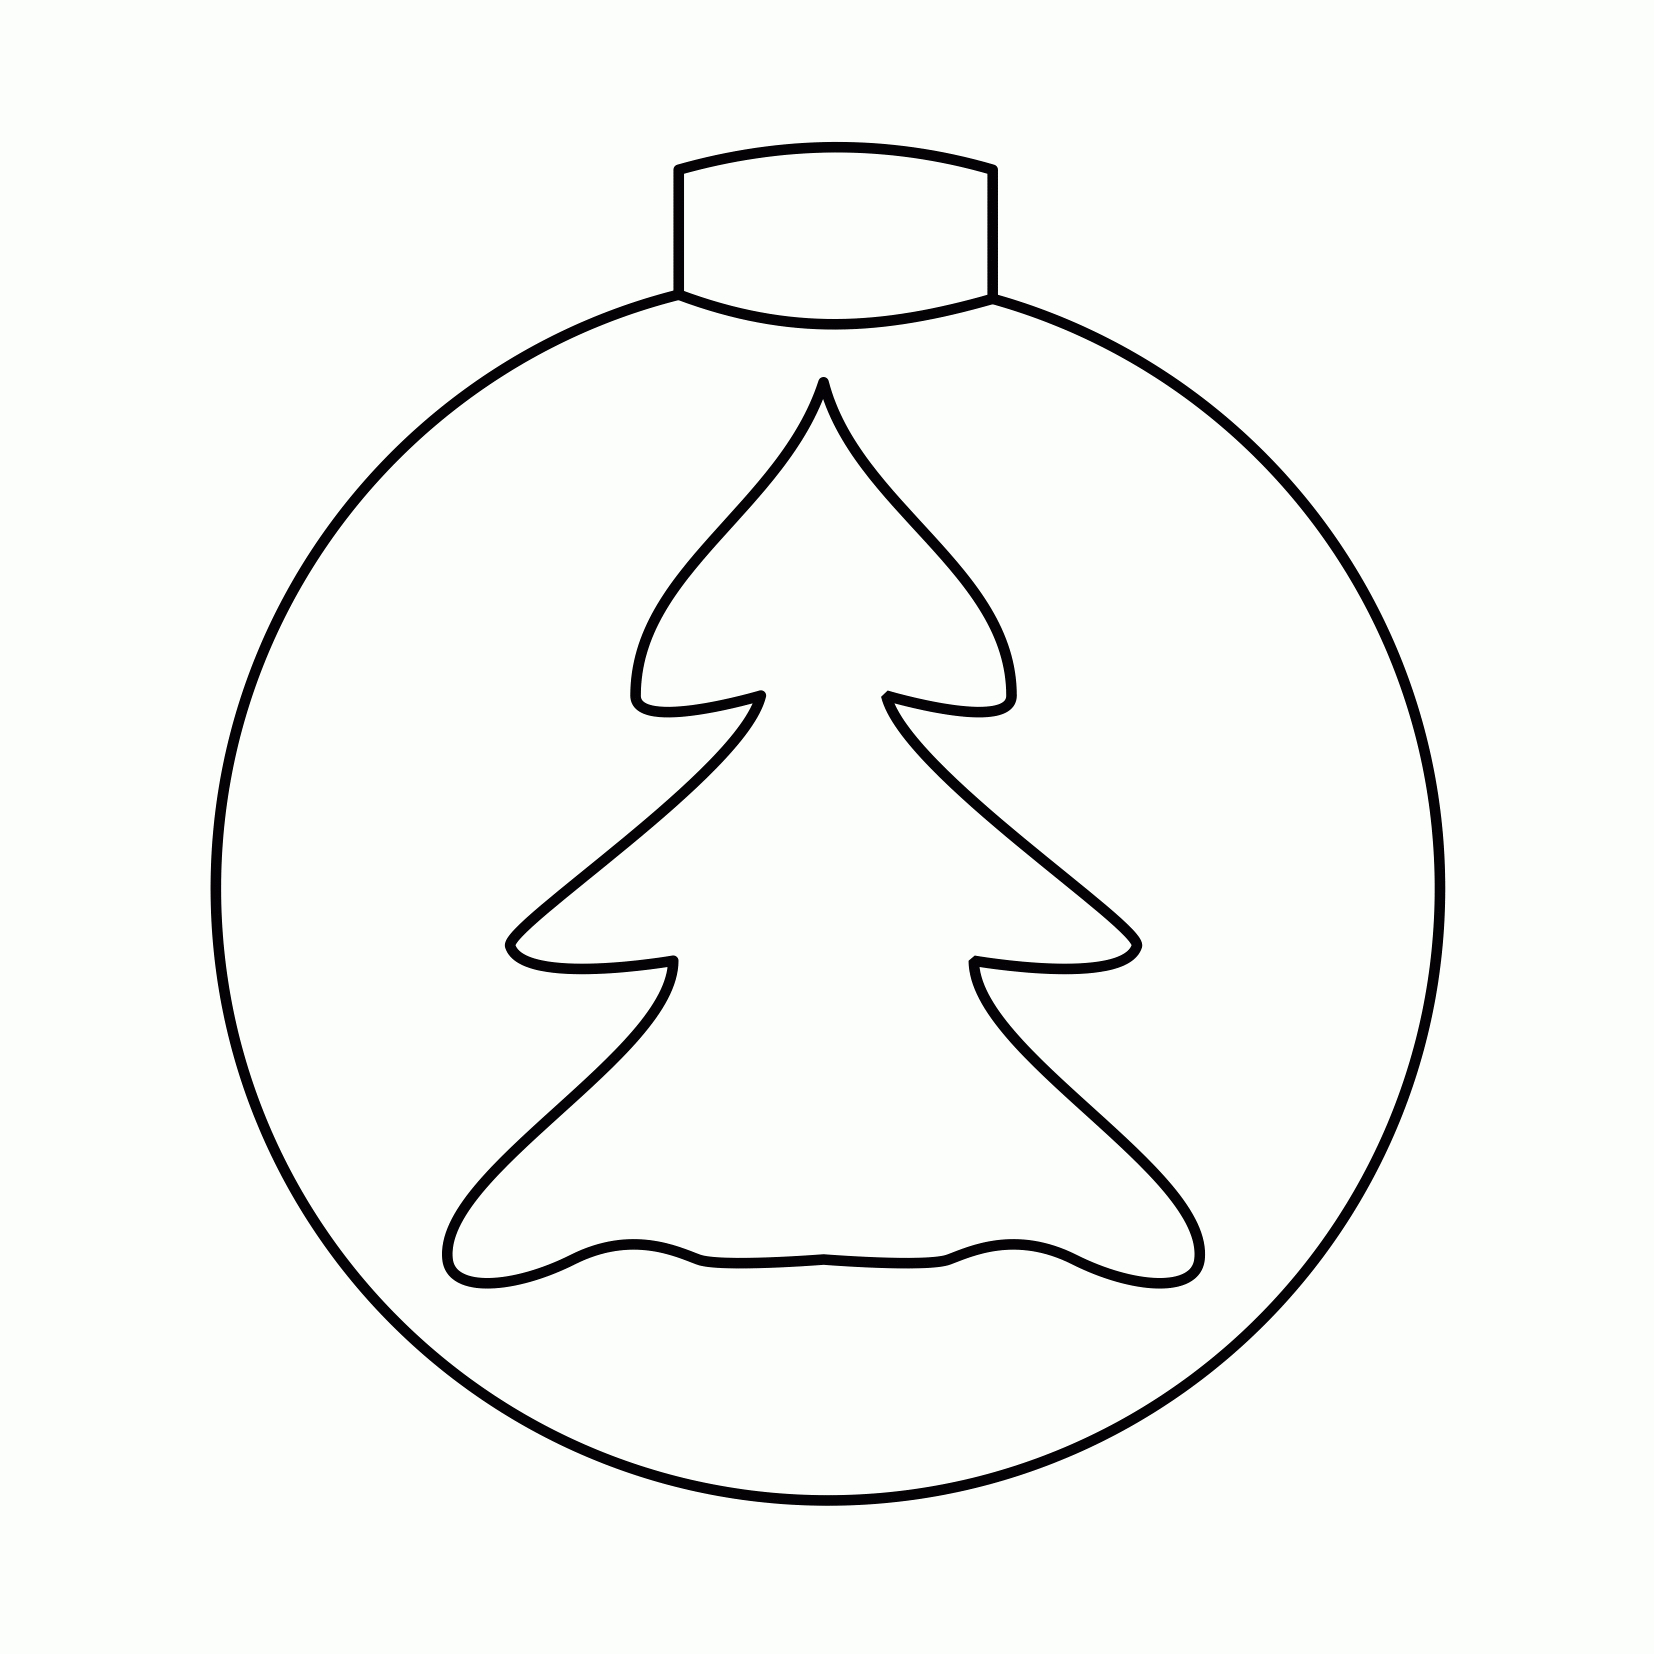 Coloring ~ Christmas Ornaments To Color Beautiful Printable Coloring - Free Printable Christmas Tree Ornaments To Color